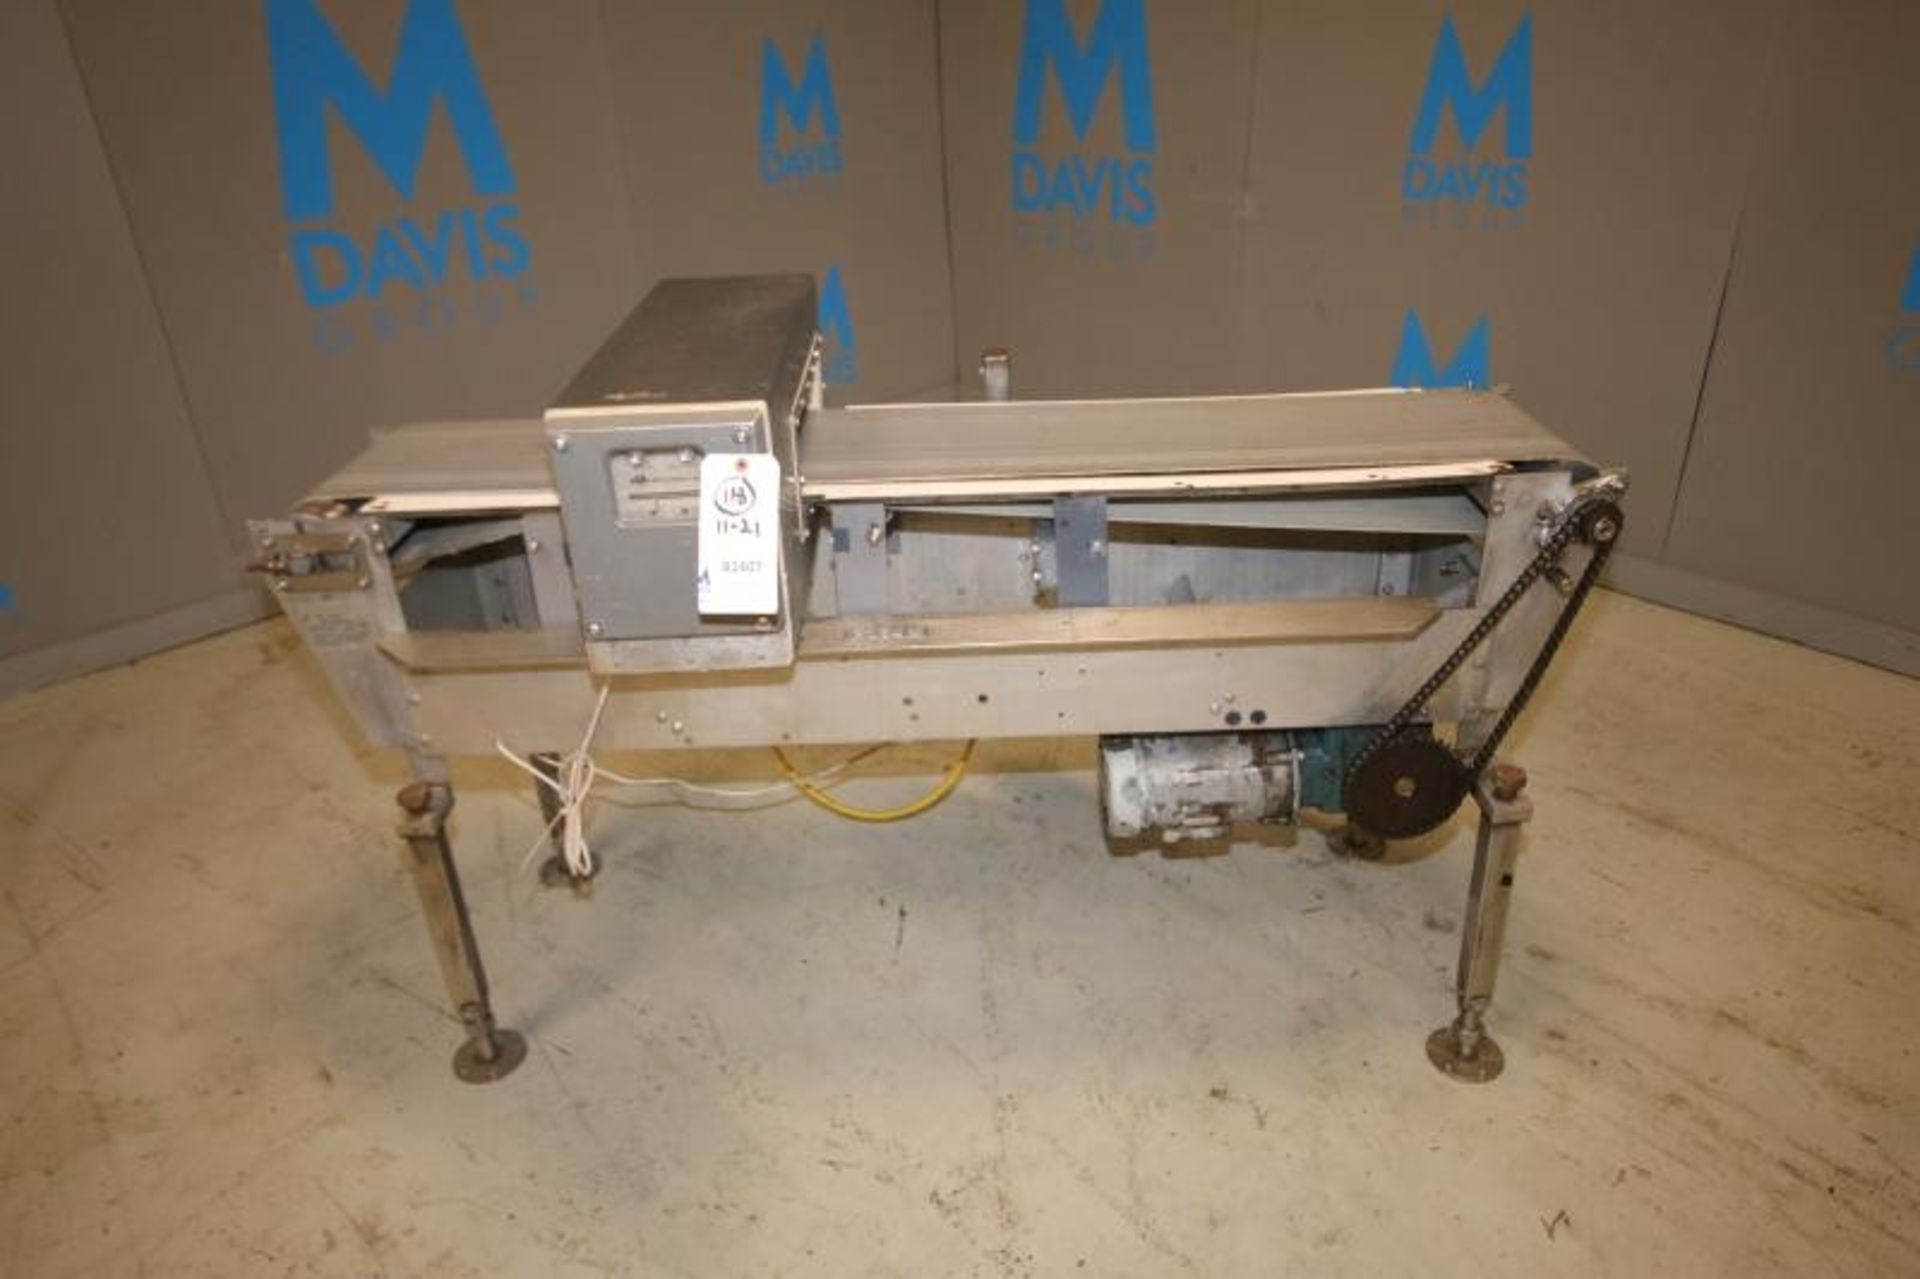 Lock / Metalchek 9 S/S Metal Detector System, with 14" W x 3.25" H Opening, Mounted on 65" L x 34" H - Image 2 of 2